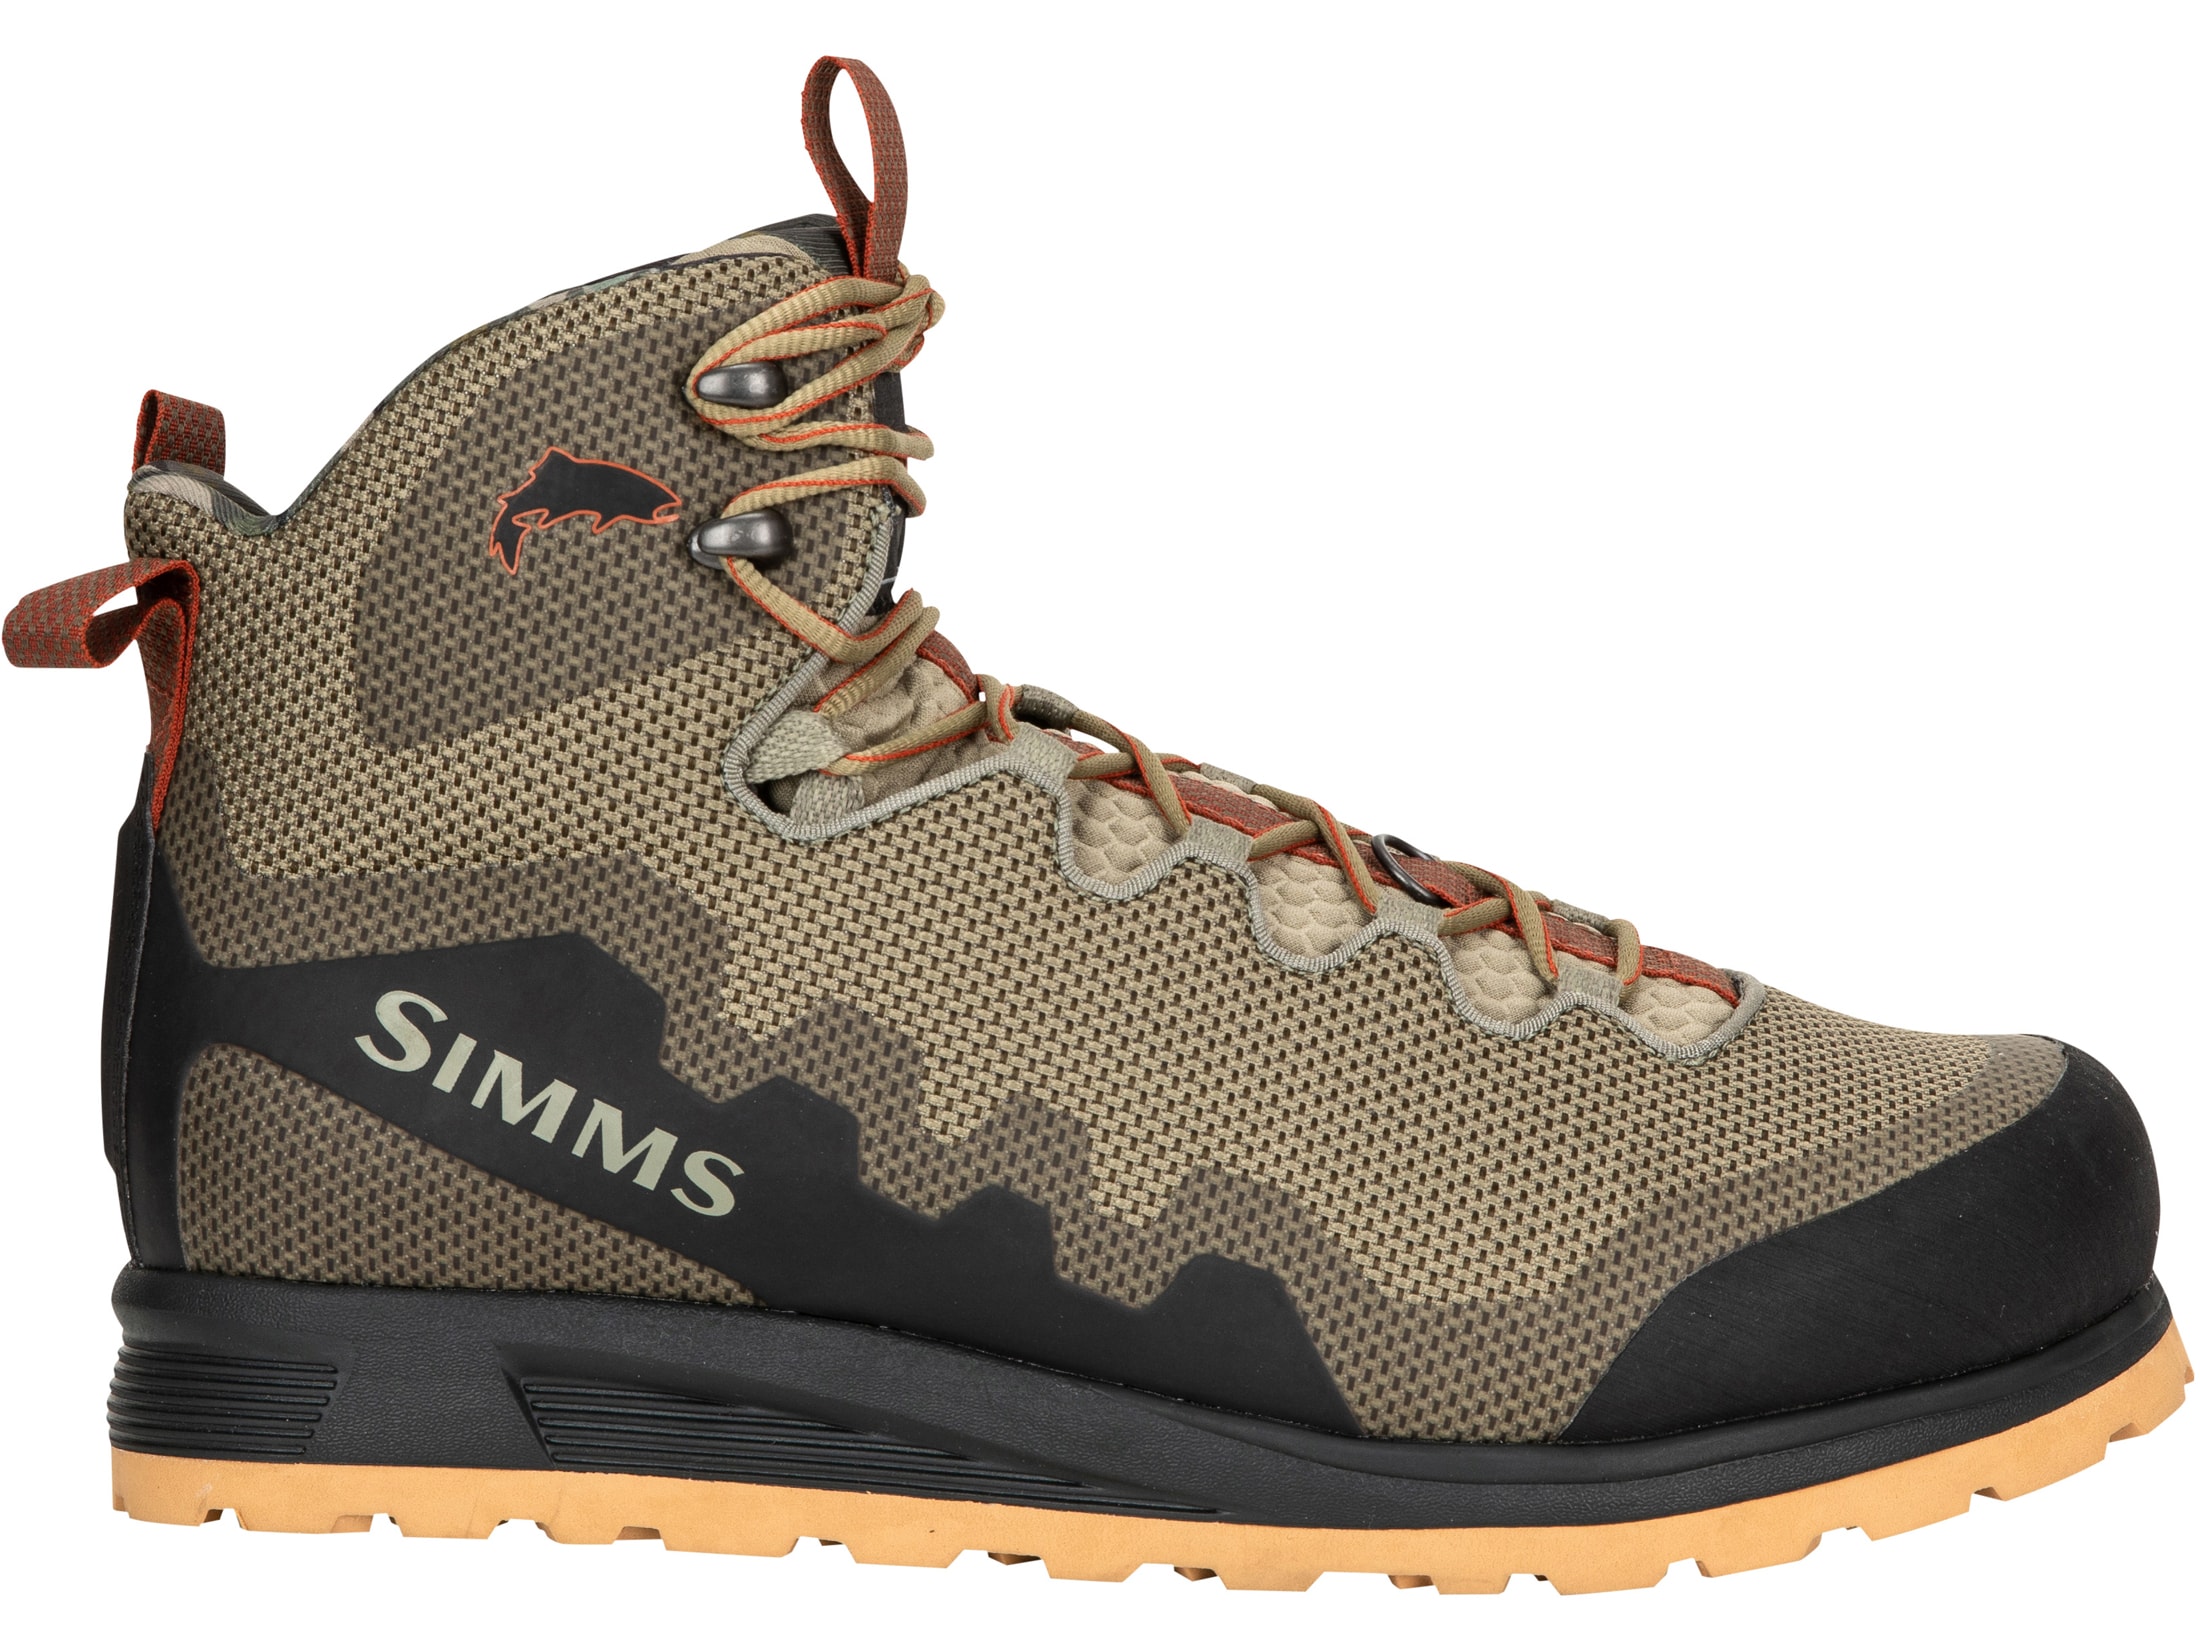 Simms Flyweight Access Wading Boots Synthetic Dark Stone Men's 10 D